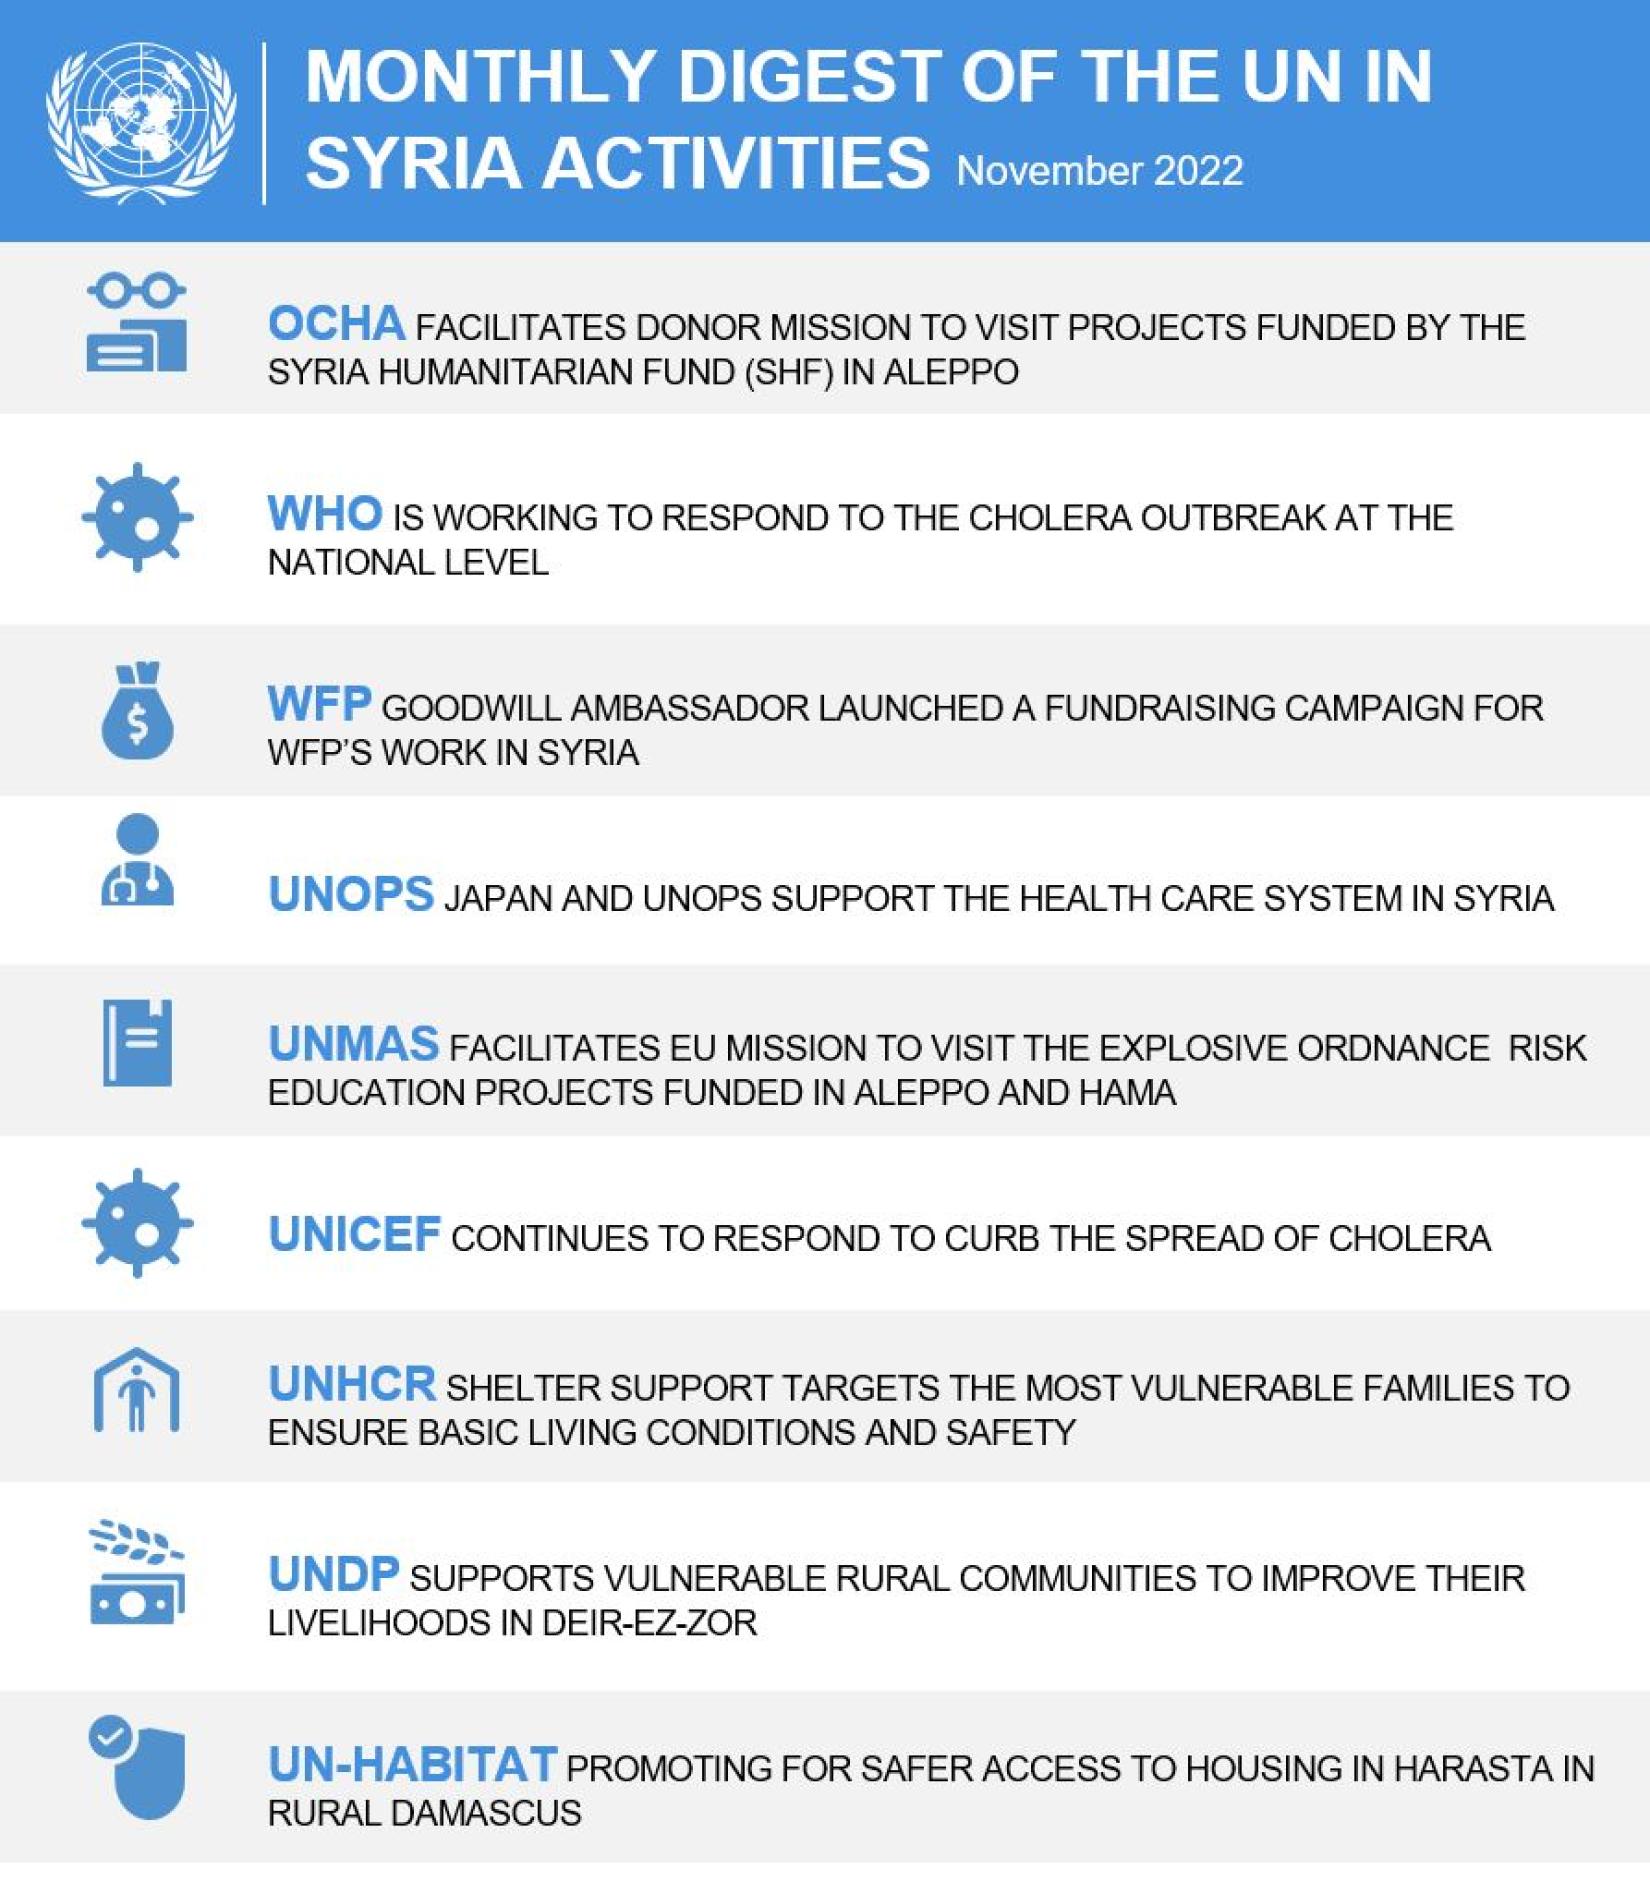 Monthly Digest of the UN in Syria Activties - Nov 2022